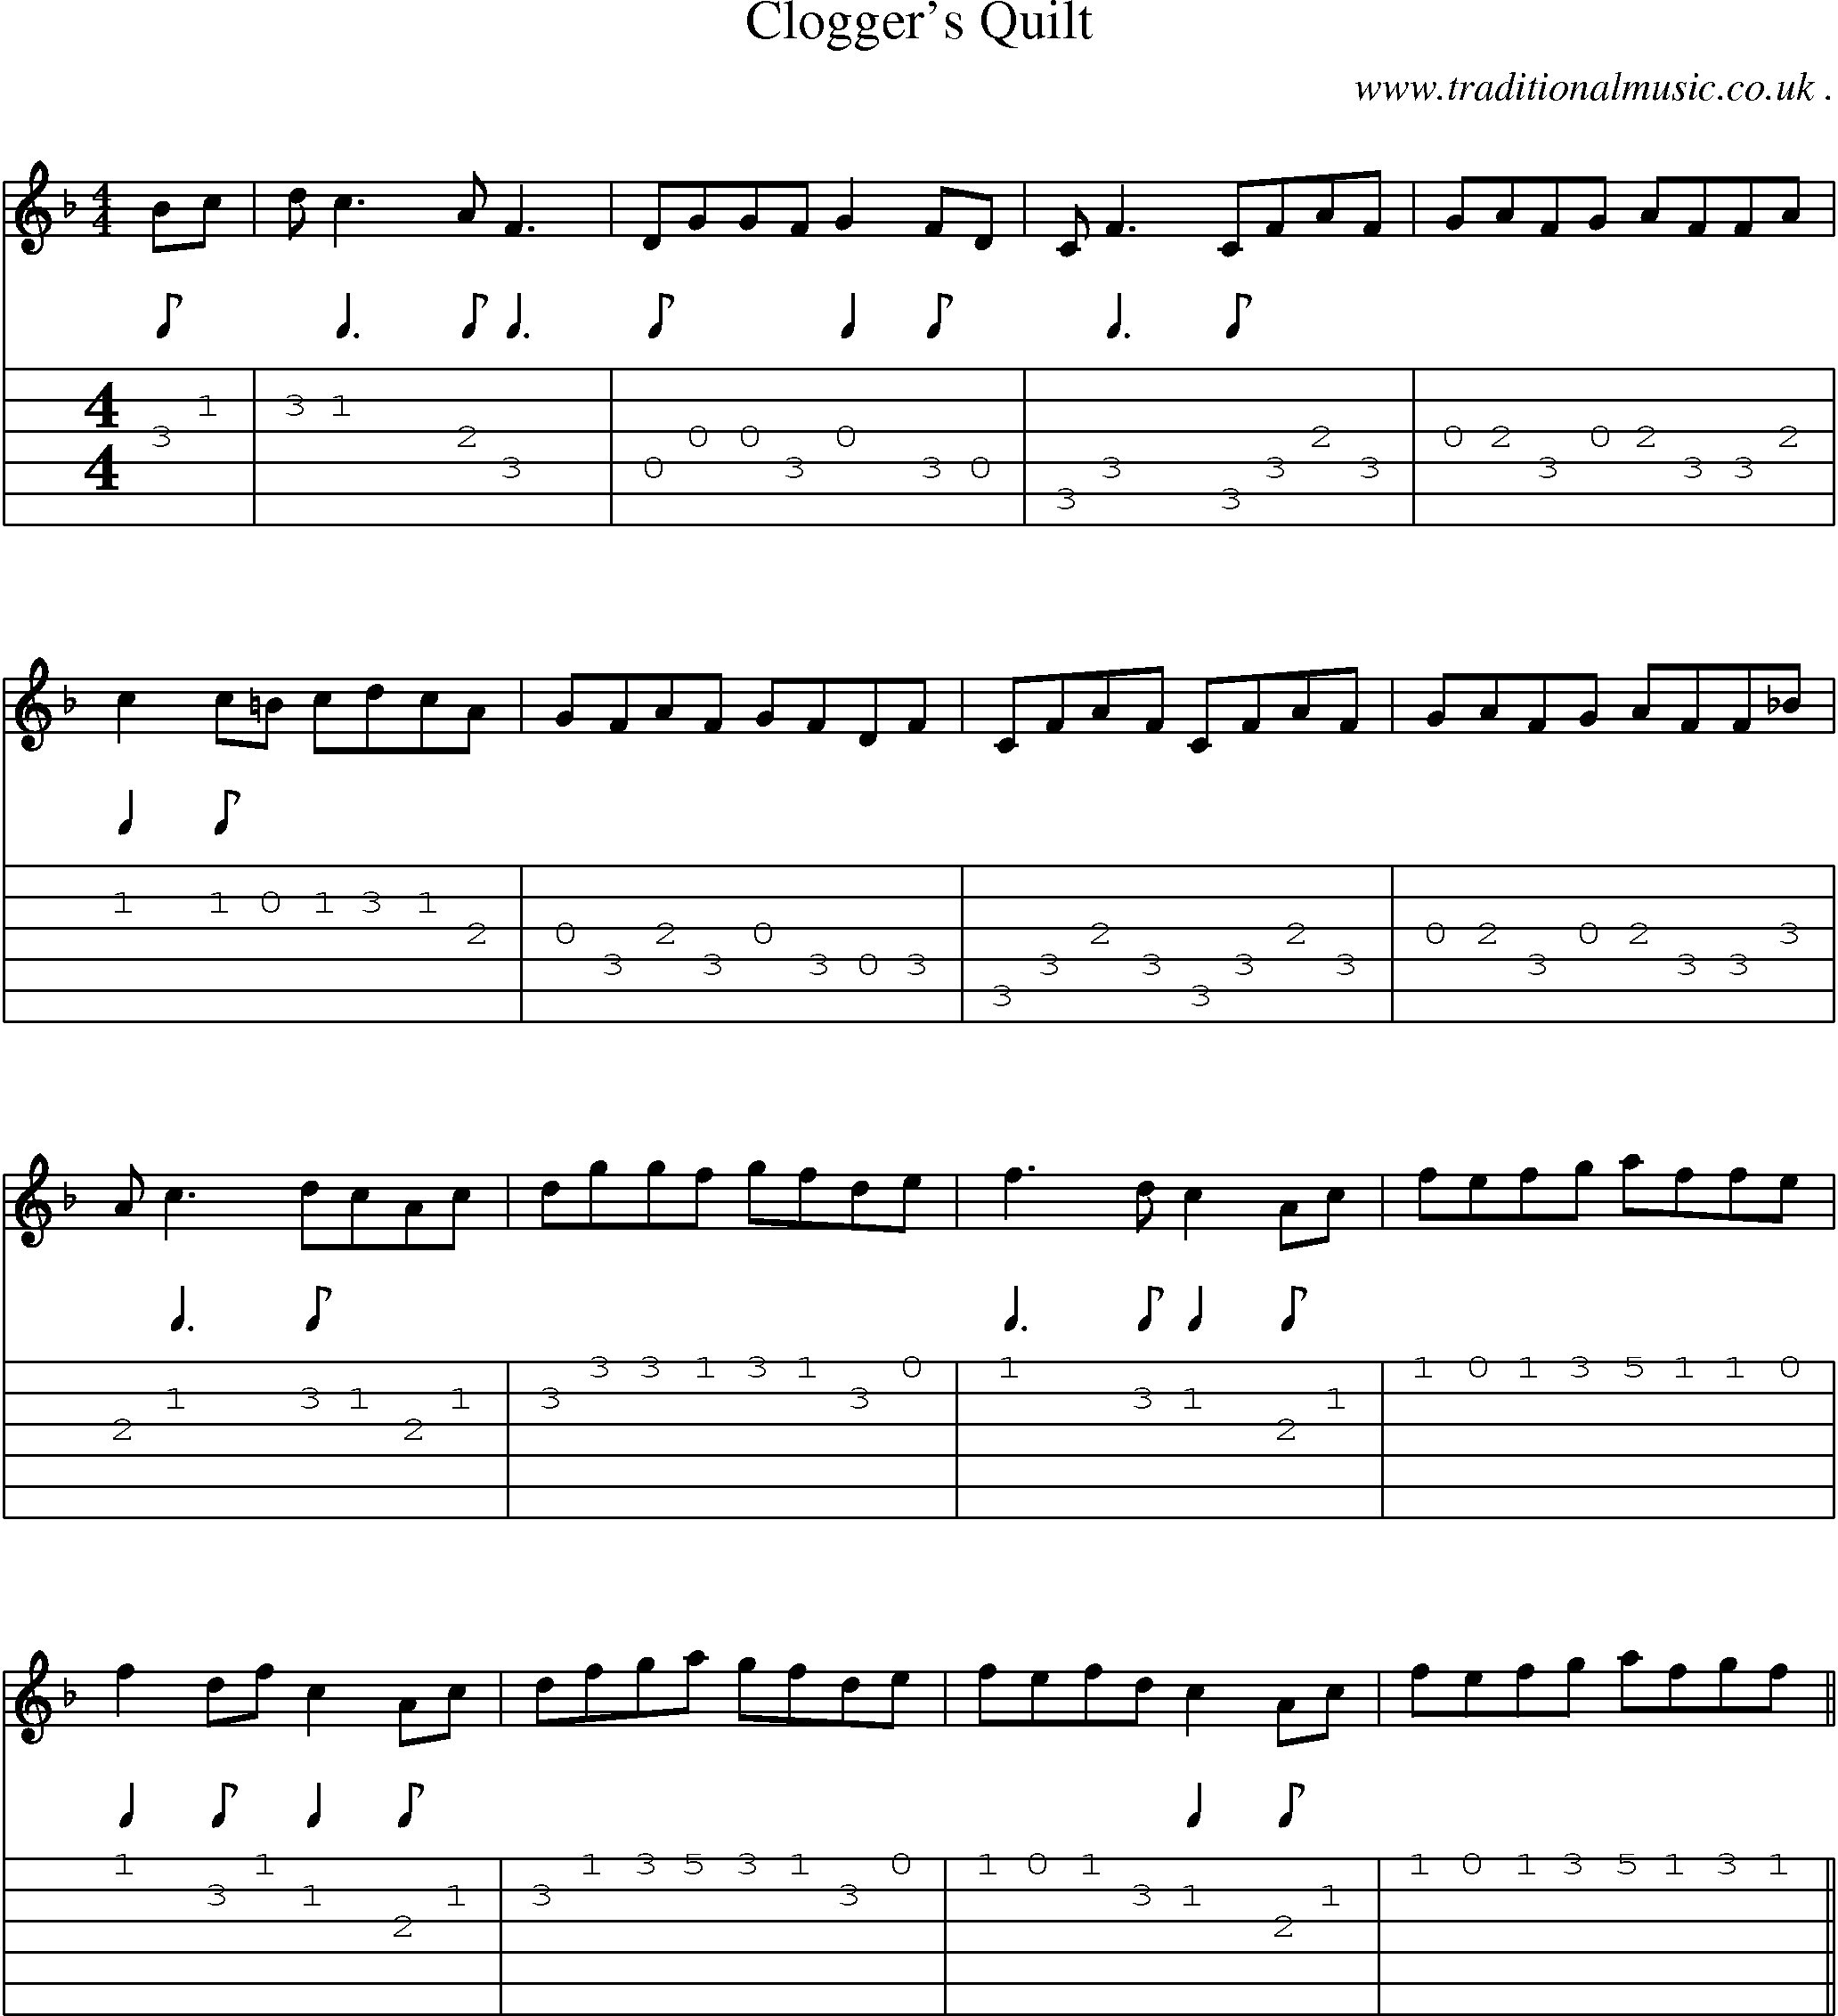 Sheet-Music and Guitar Tabs for Cloggers Quilt